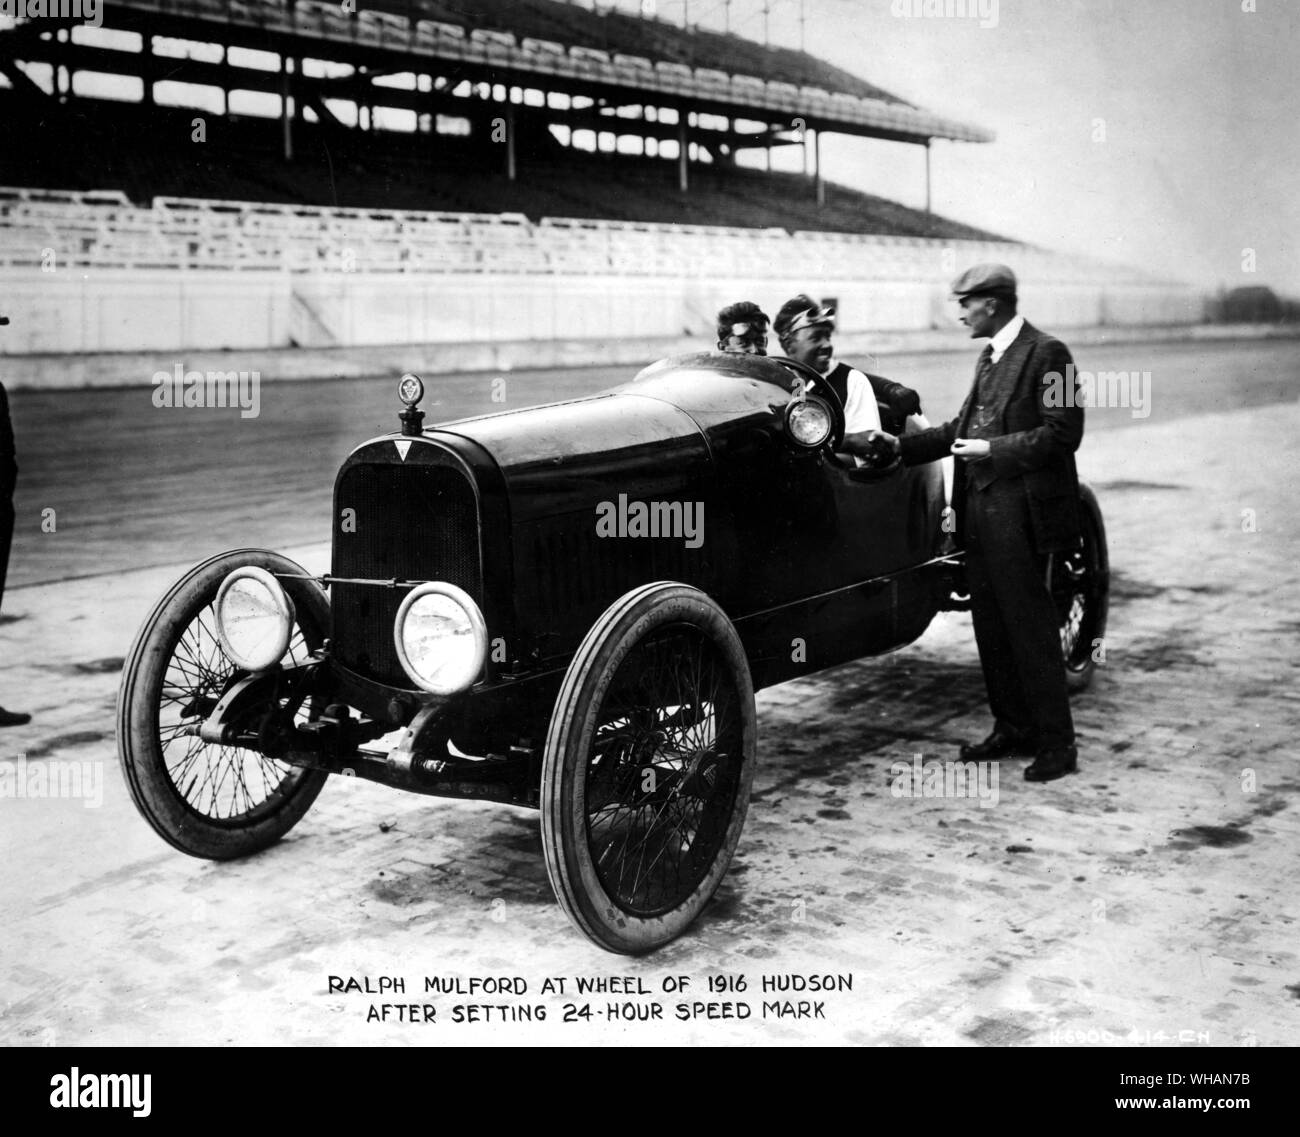 Ralph Mulford at wheel of 1916 Hudson after setting 24 hour speed mark Stock Photo